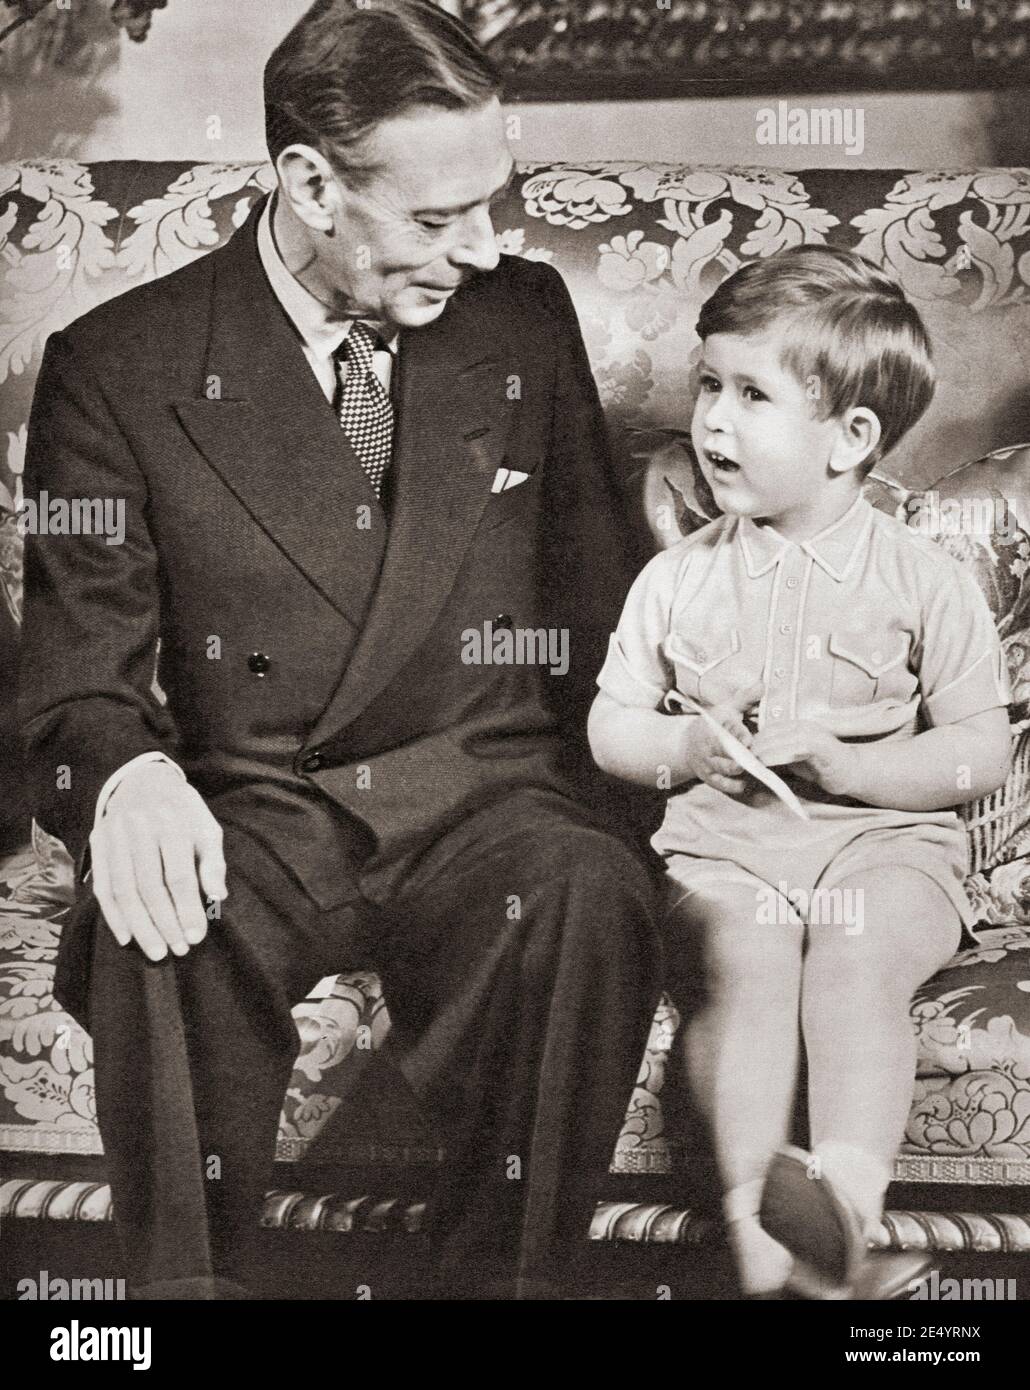 EDITORIAL ONLY George VI seen here with his grandson Prince Charles, on the Prince's third birthday, 1951.  George VI, Albert Frederick Arthur George, 1895 –1952. King of the United Kingdom and the Dominions of the British Commonwealth.  Charles, Prince of Wales (Charles Philip Arthur George) 1948.  Heir apparent to the British throne as the eldest son of Queen Elizabeth II.  From The Queen Elizabeth Coronation Book, published 1953. Stock Photo